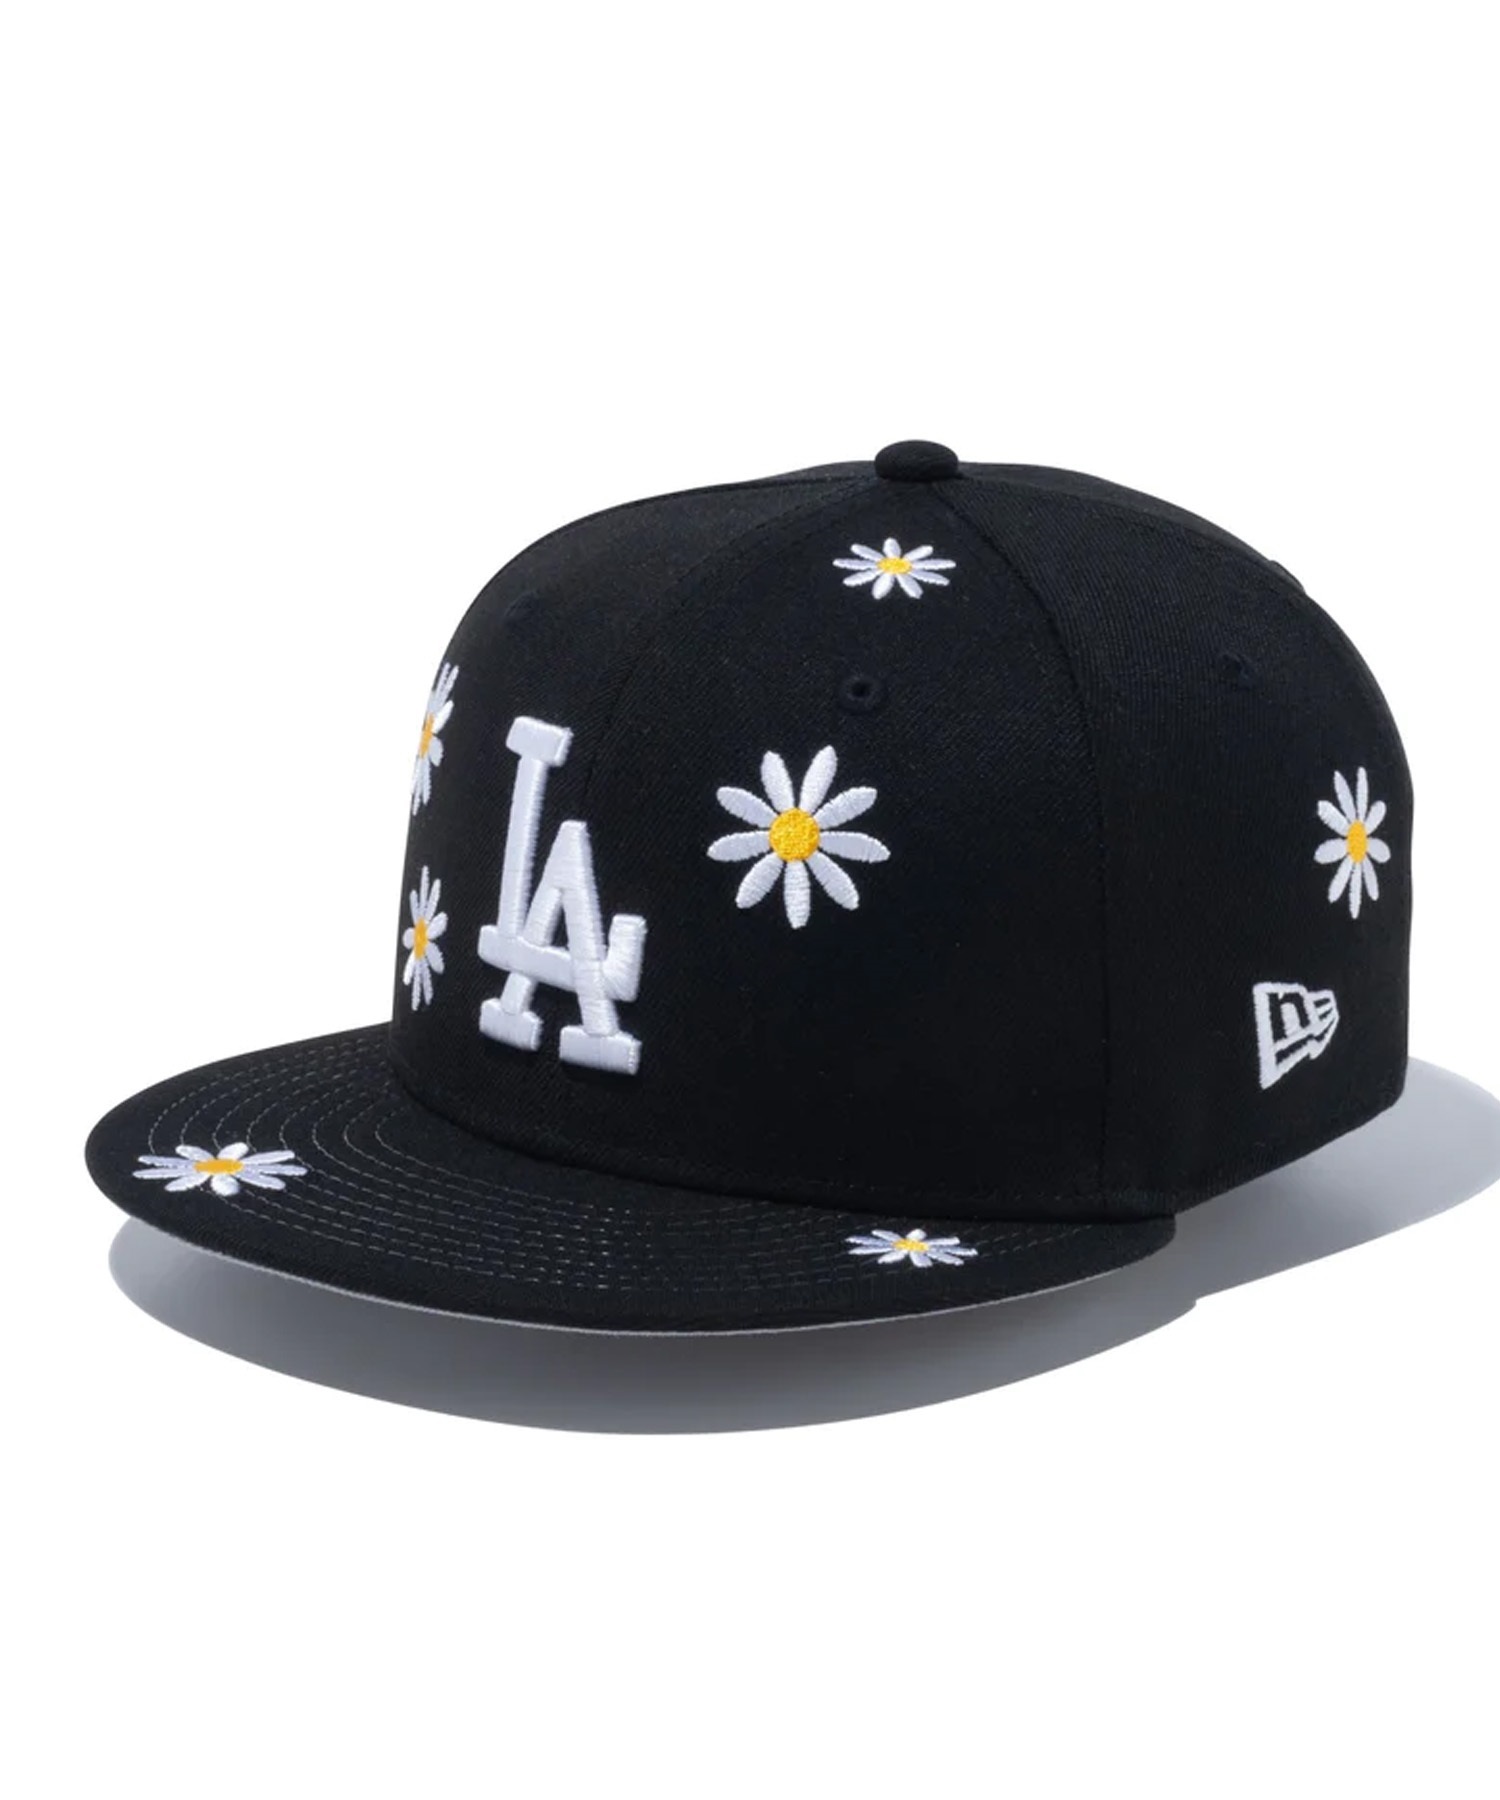 NEW ERA ニューエラ Youth 9FIFTY MLB Flower Embroidery ロサンゼルス